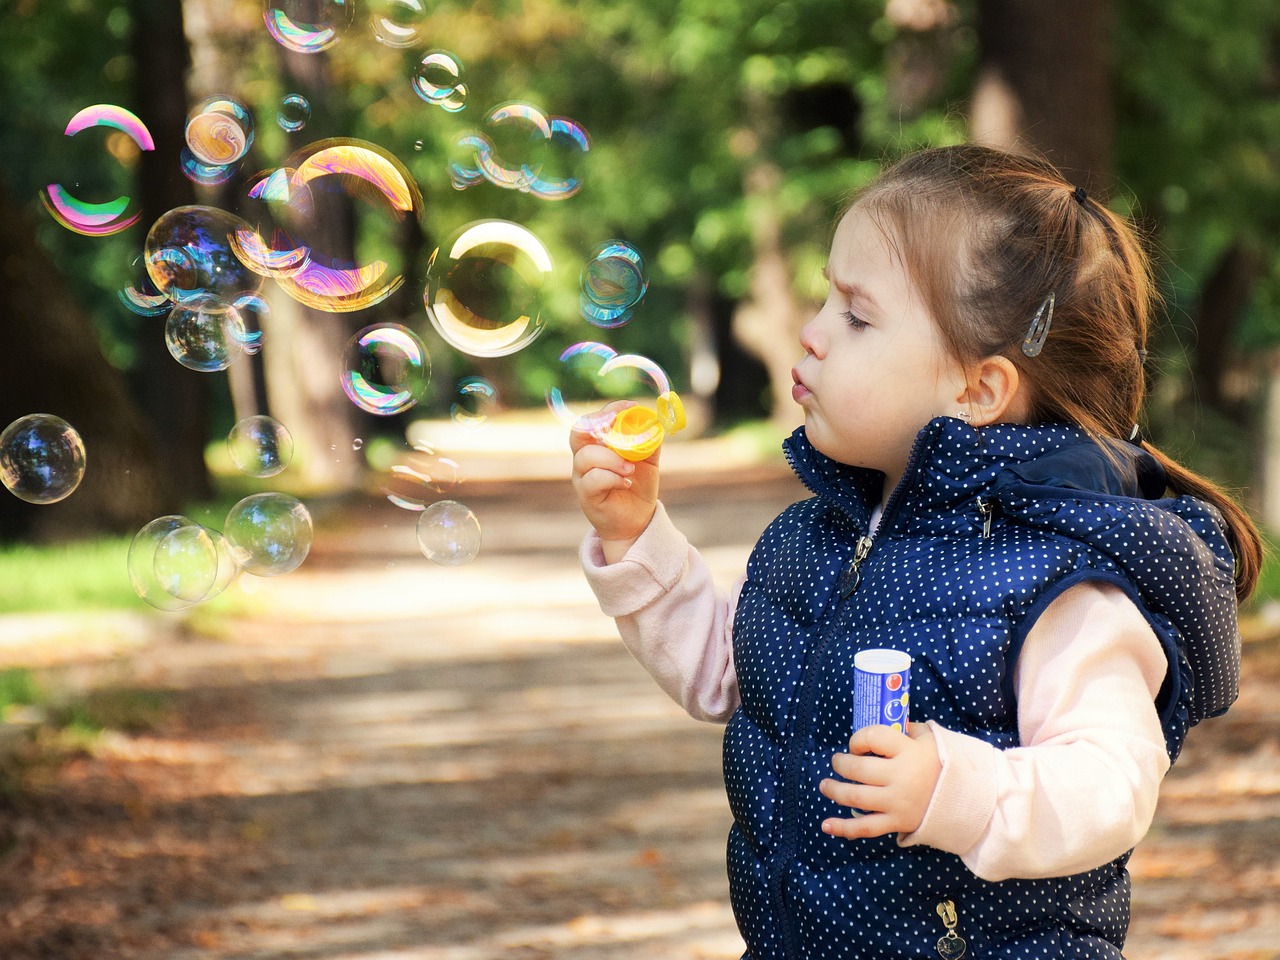 An ordinary moment of blowing bubbles with a child